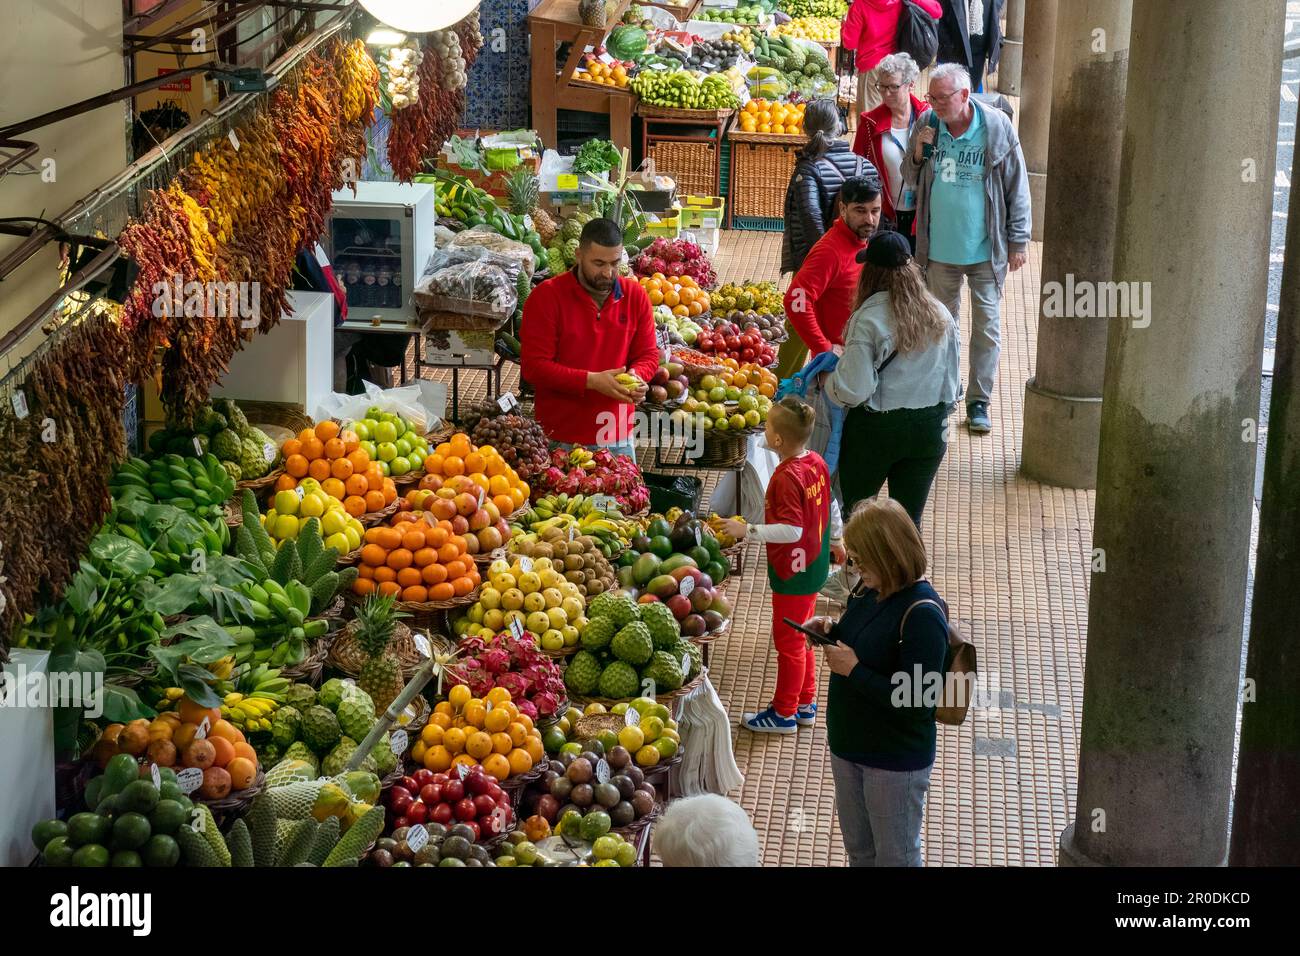 The Mercado dos Lavradores is a fruit, vegetable, flower and fish market in Funchal, Madeira. Stock Photo